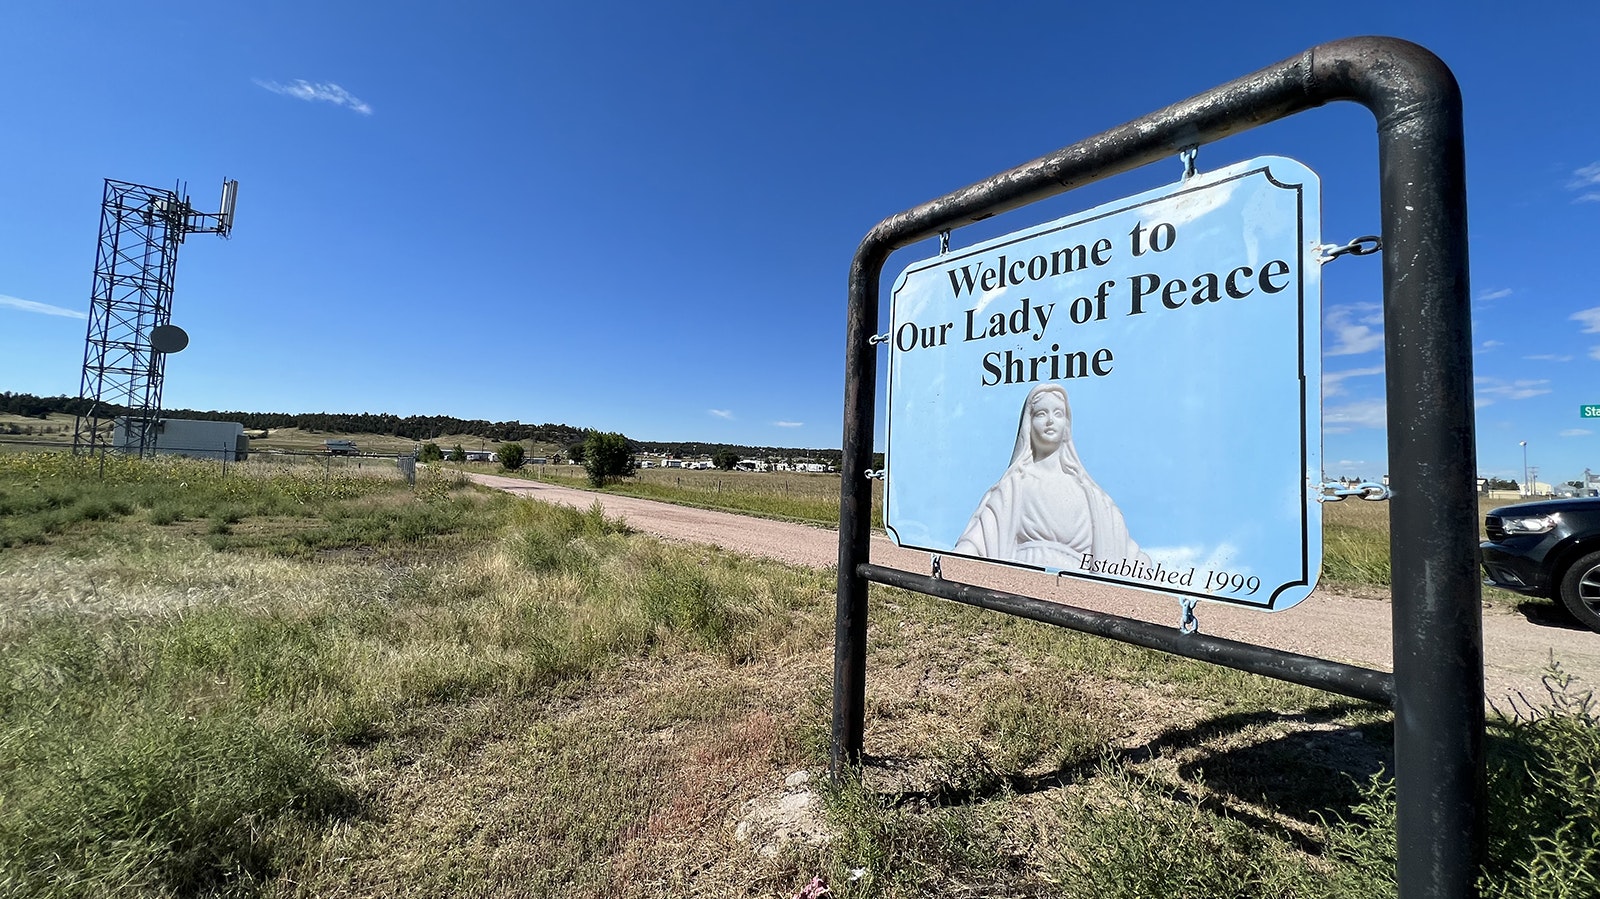 After getting off Interstate 80 at Exit 401, its easy to find the Our Lady of Peace shrine: just follow the signs.